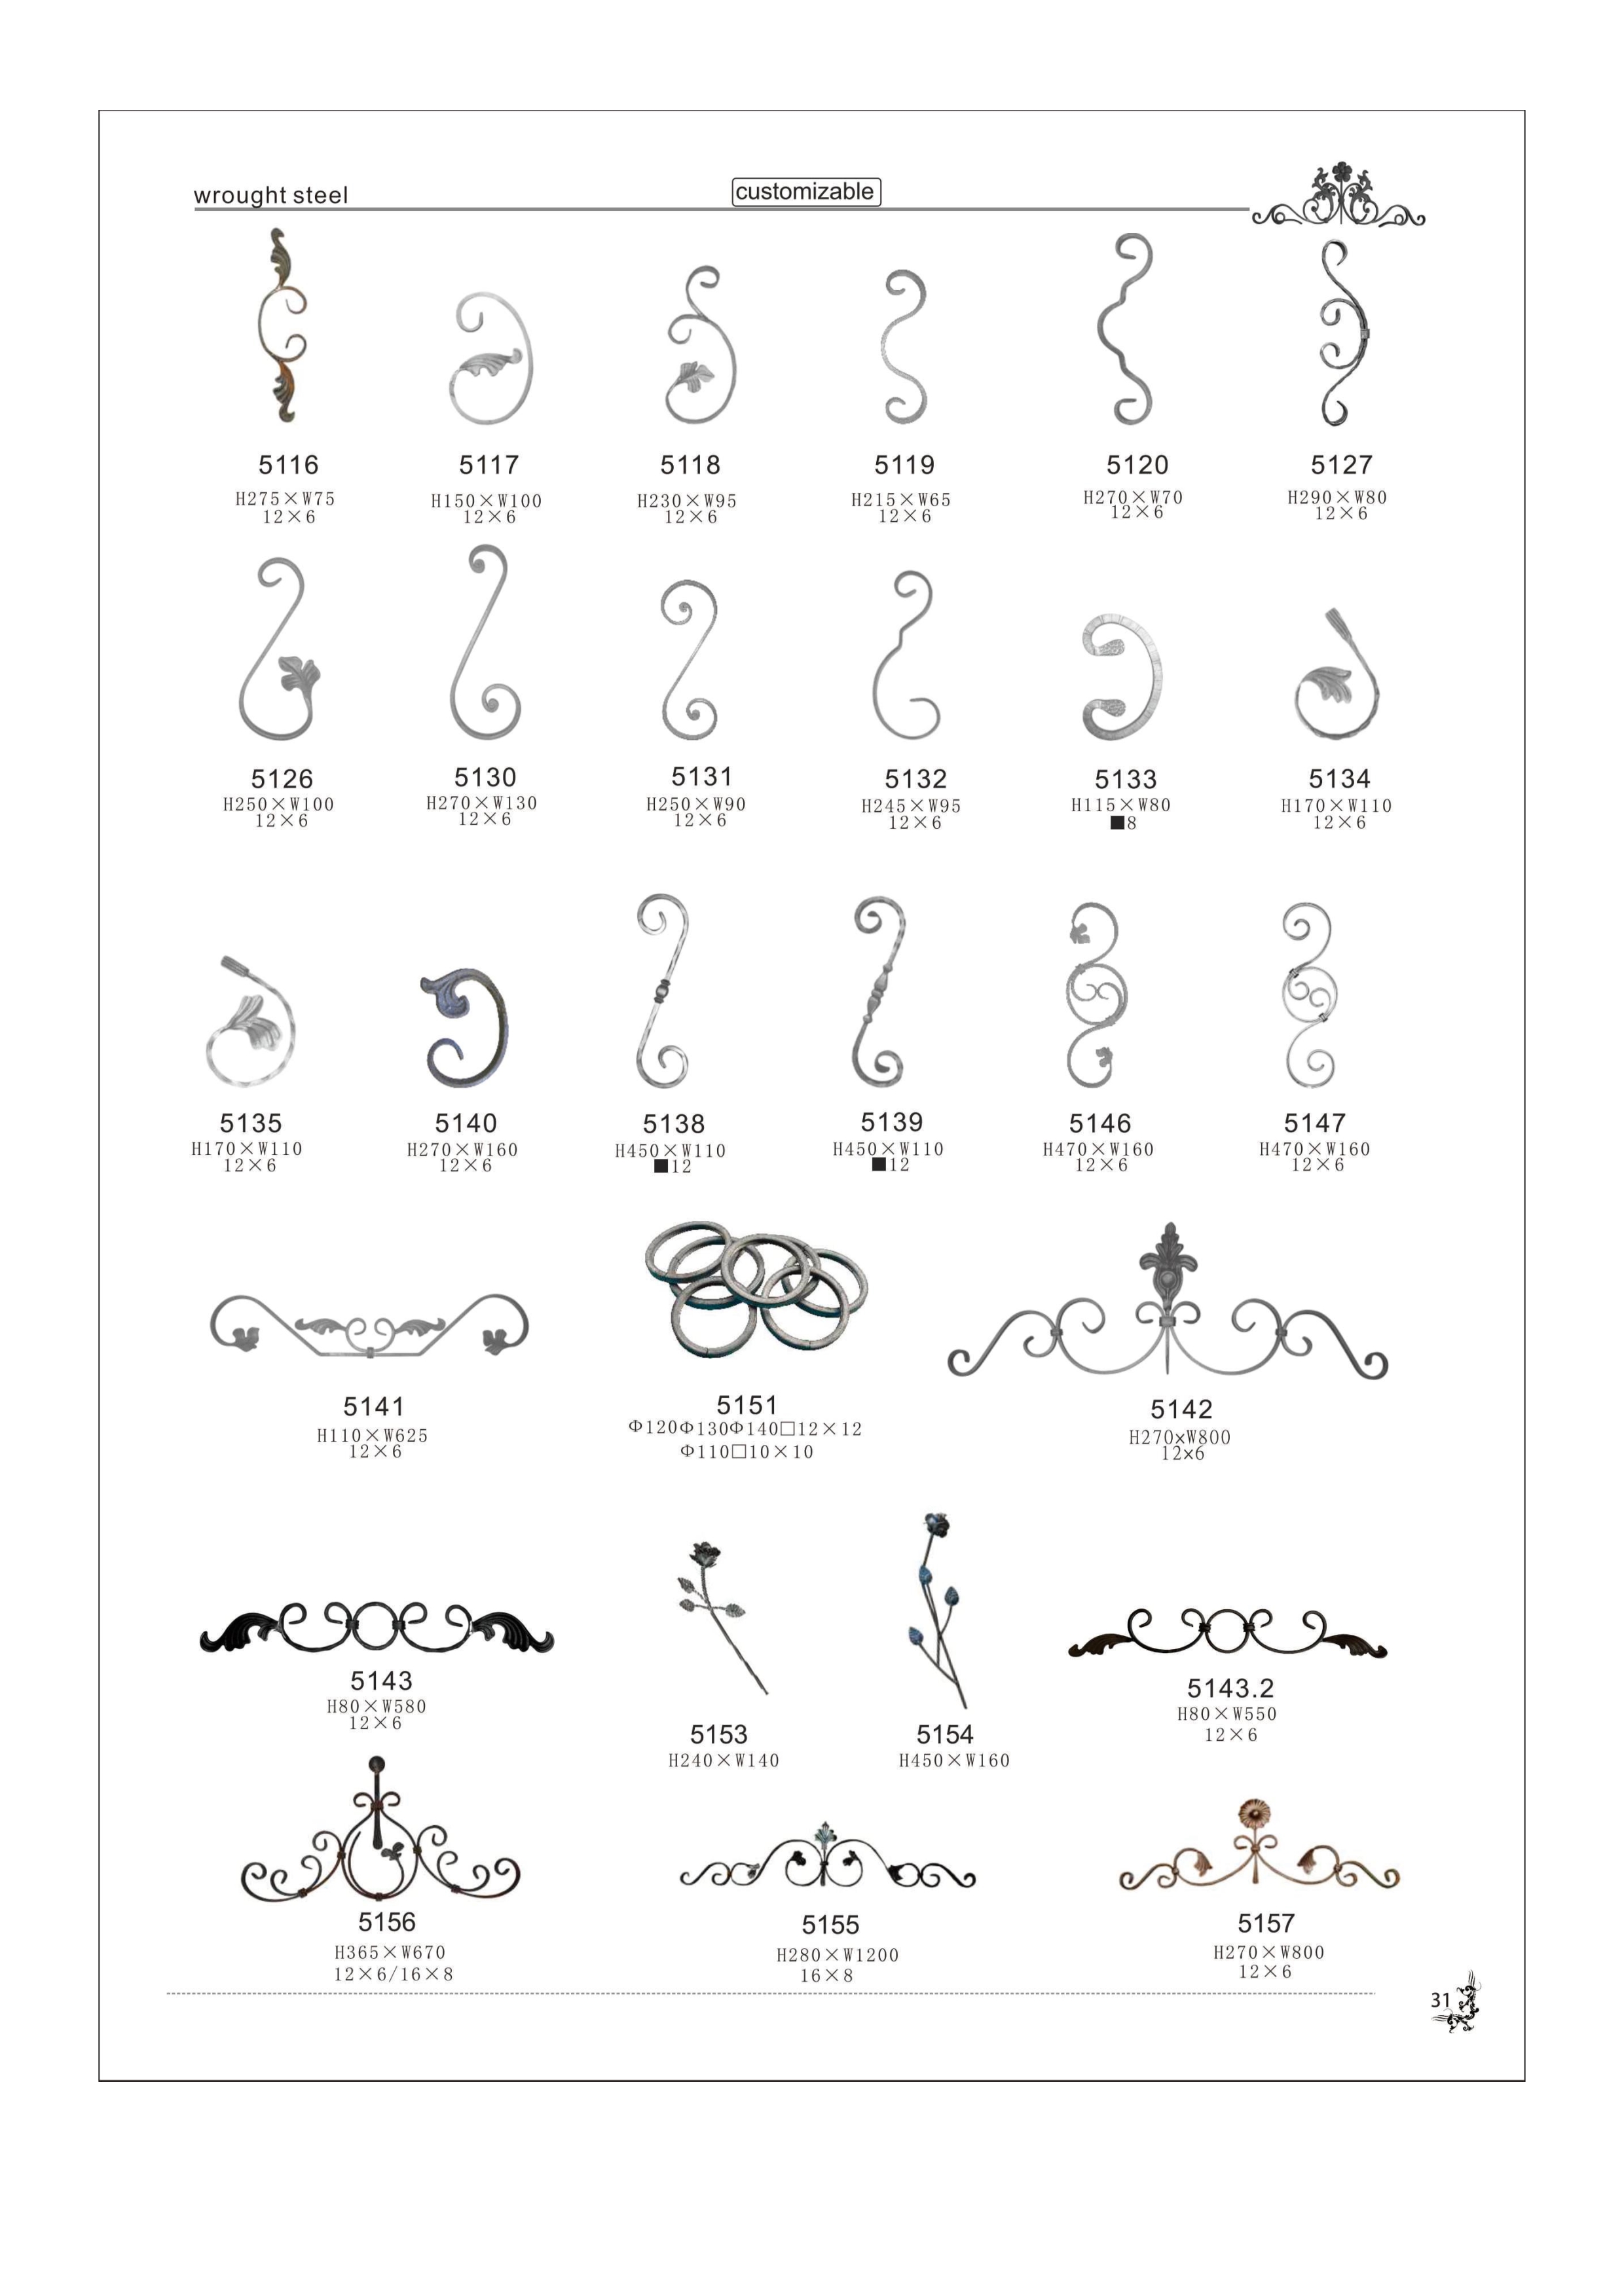 wrought steel ornaments Featured Image